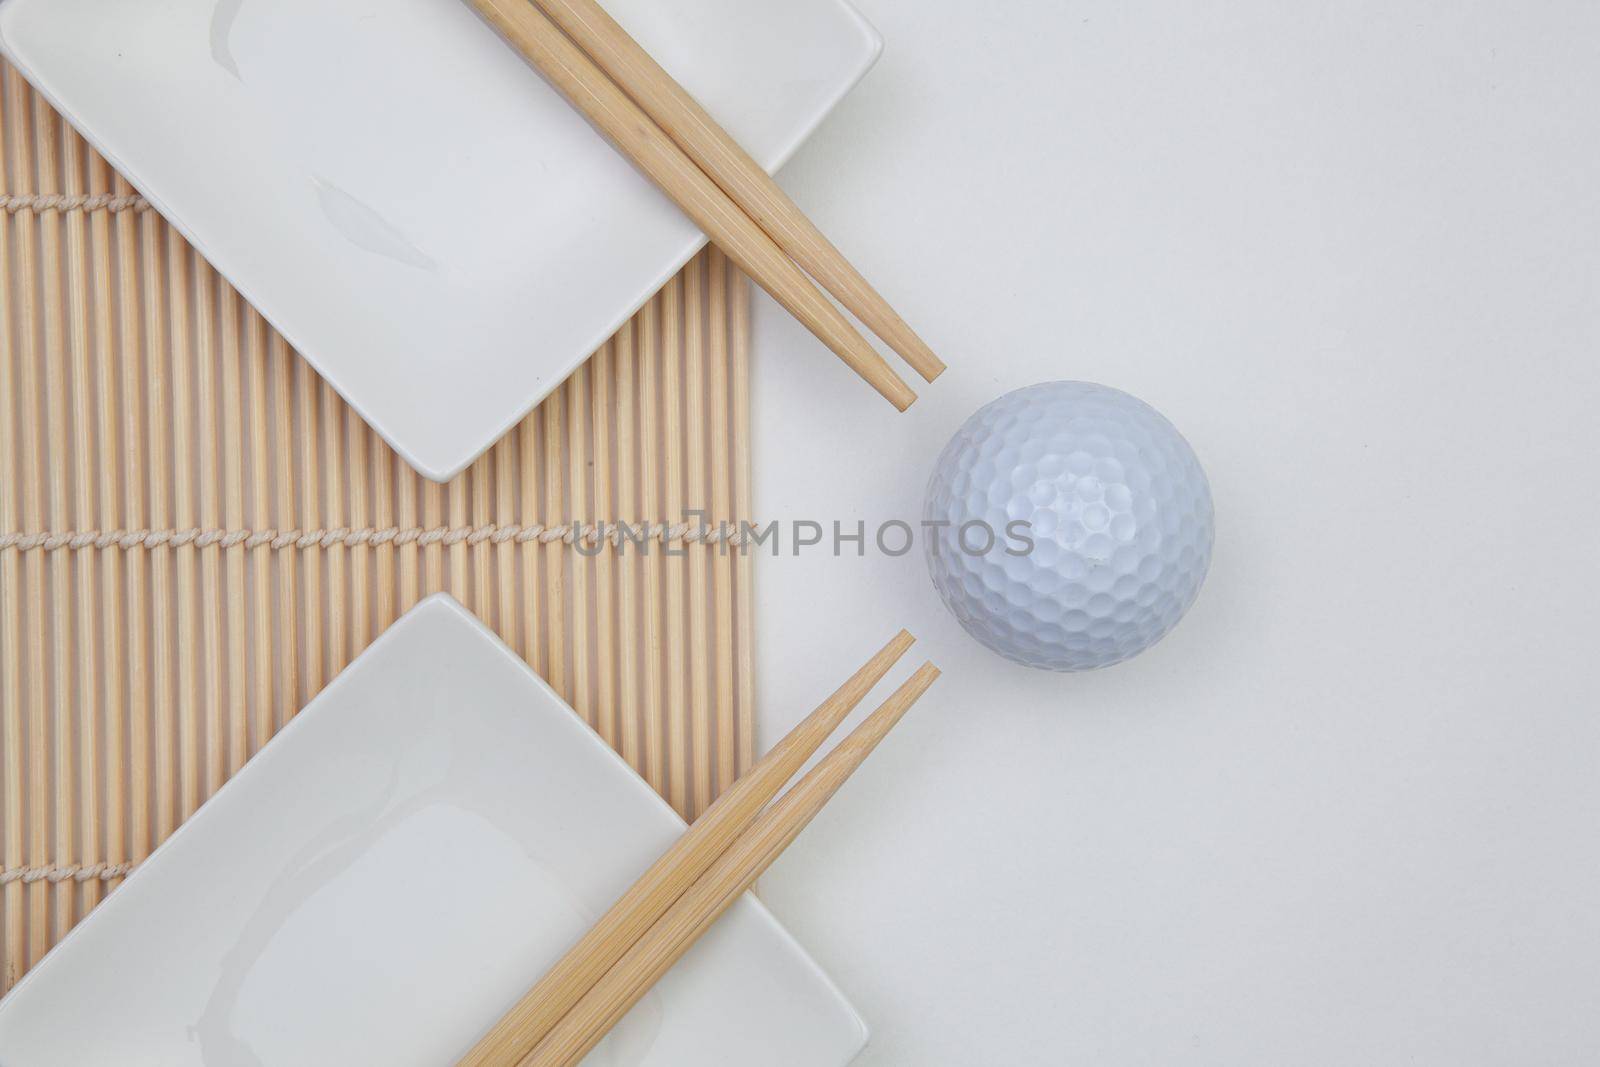 Top View Of White Empty Sushi Plates With Bamboo Chopsticks and Golf Ball.  by CaptureLight